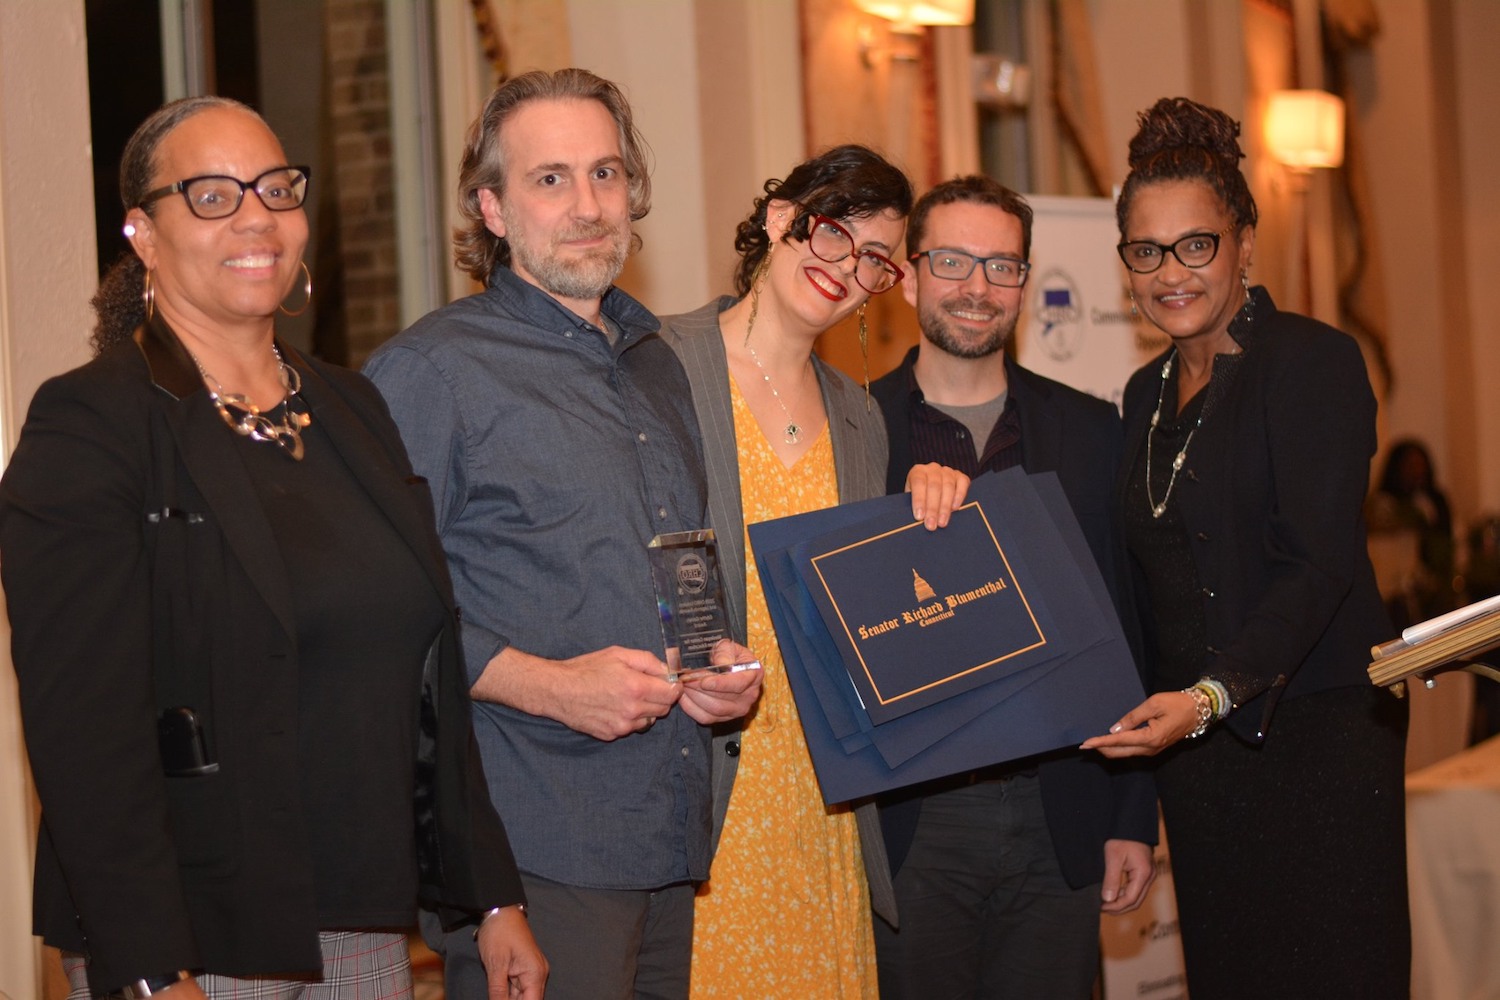 From left, Cheryl Sharp '90, deputy director of the Connecticut Commission on Human Rights and Opportunities (CHRO); Jason Torello, Center for Prison Education alumnus; Allie Cislo, CPE program manager; Daniel McGloin, CPE academic development and planning manager; and Tanya Hughes, CHRO executive director at the 2019 Leaders and Legends award ceremony on Nov. 21.